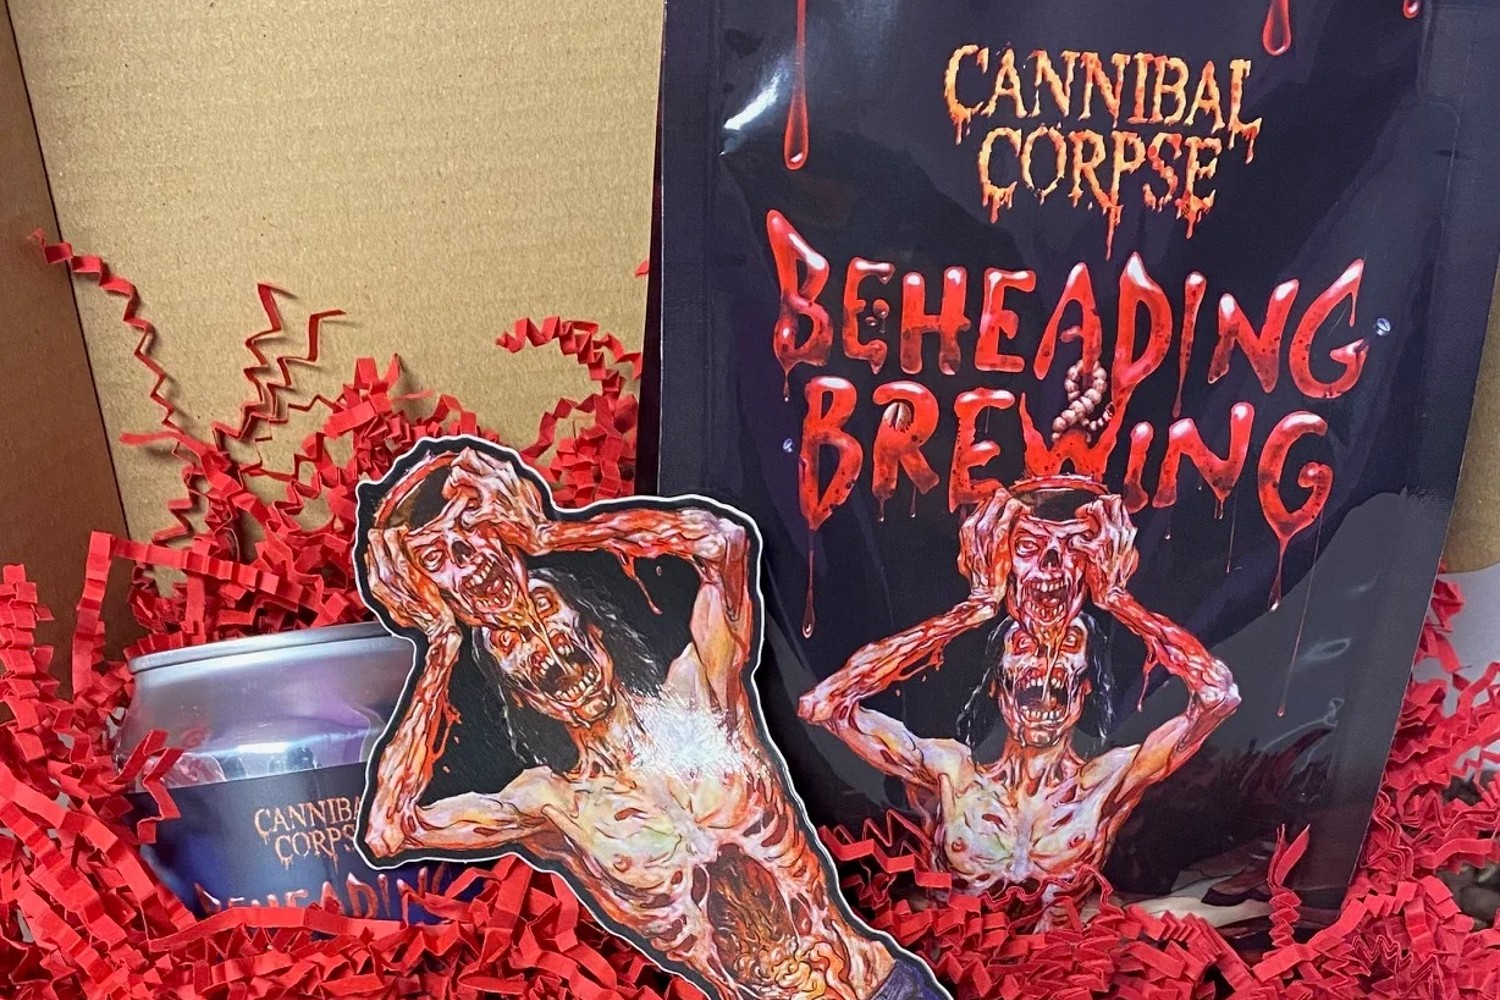 Cannibal Corpse & Beheading Brewing cold brew